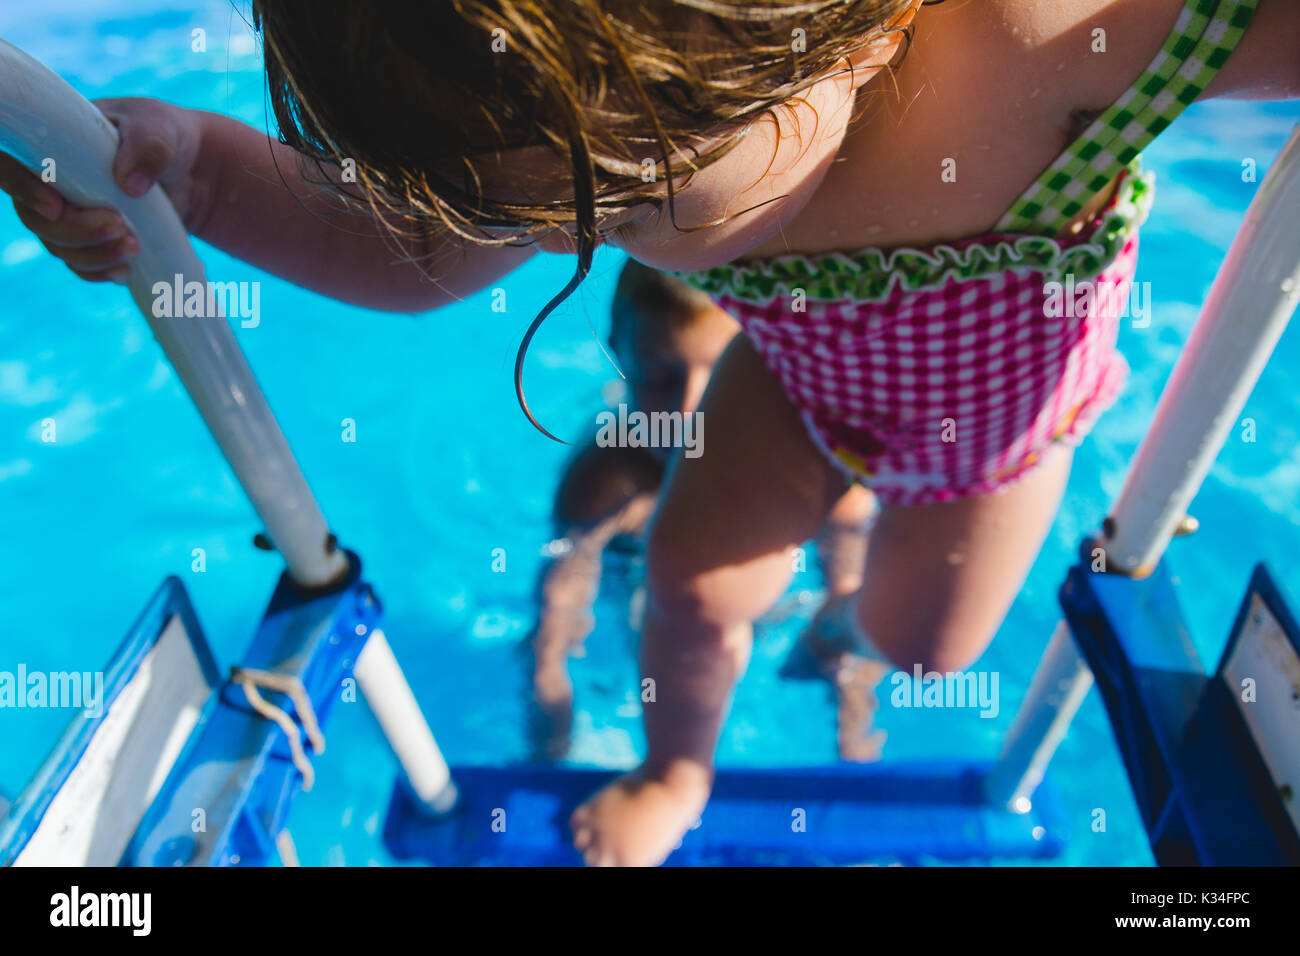 A young girl climbs out of a swimming pool during  the summer. Stock Photo